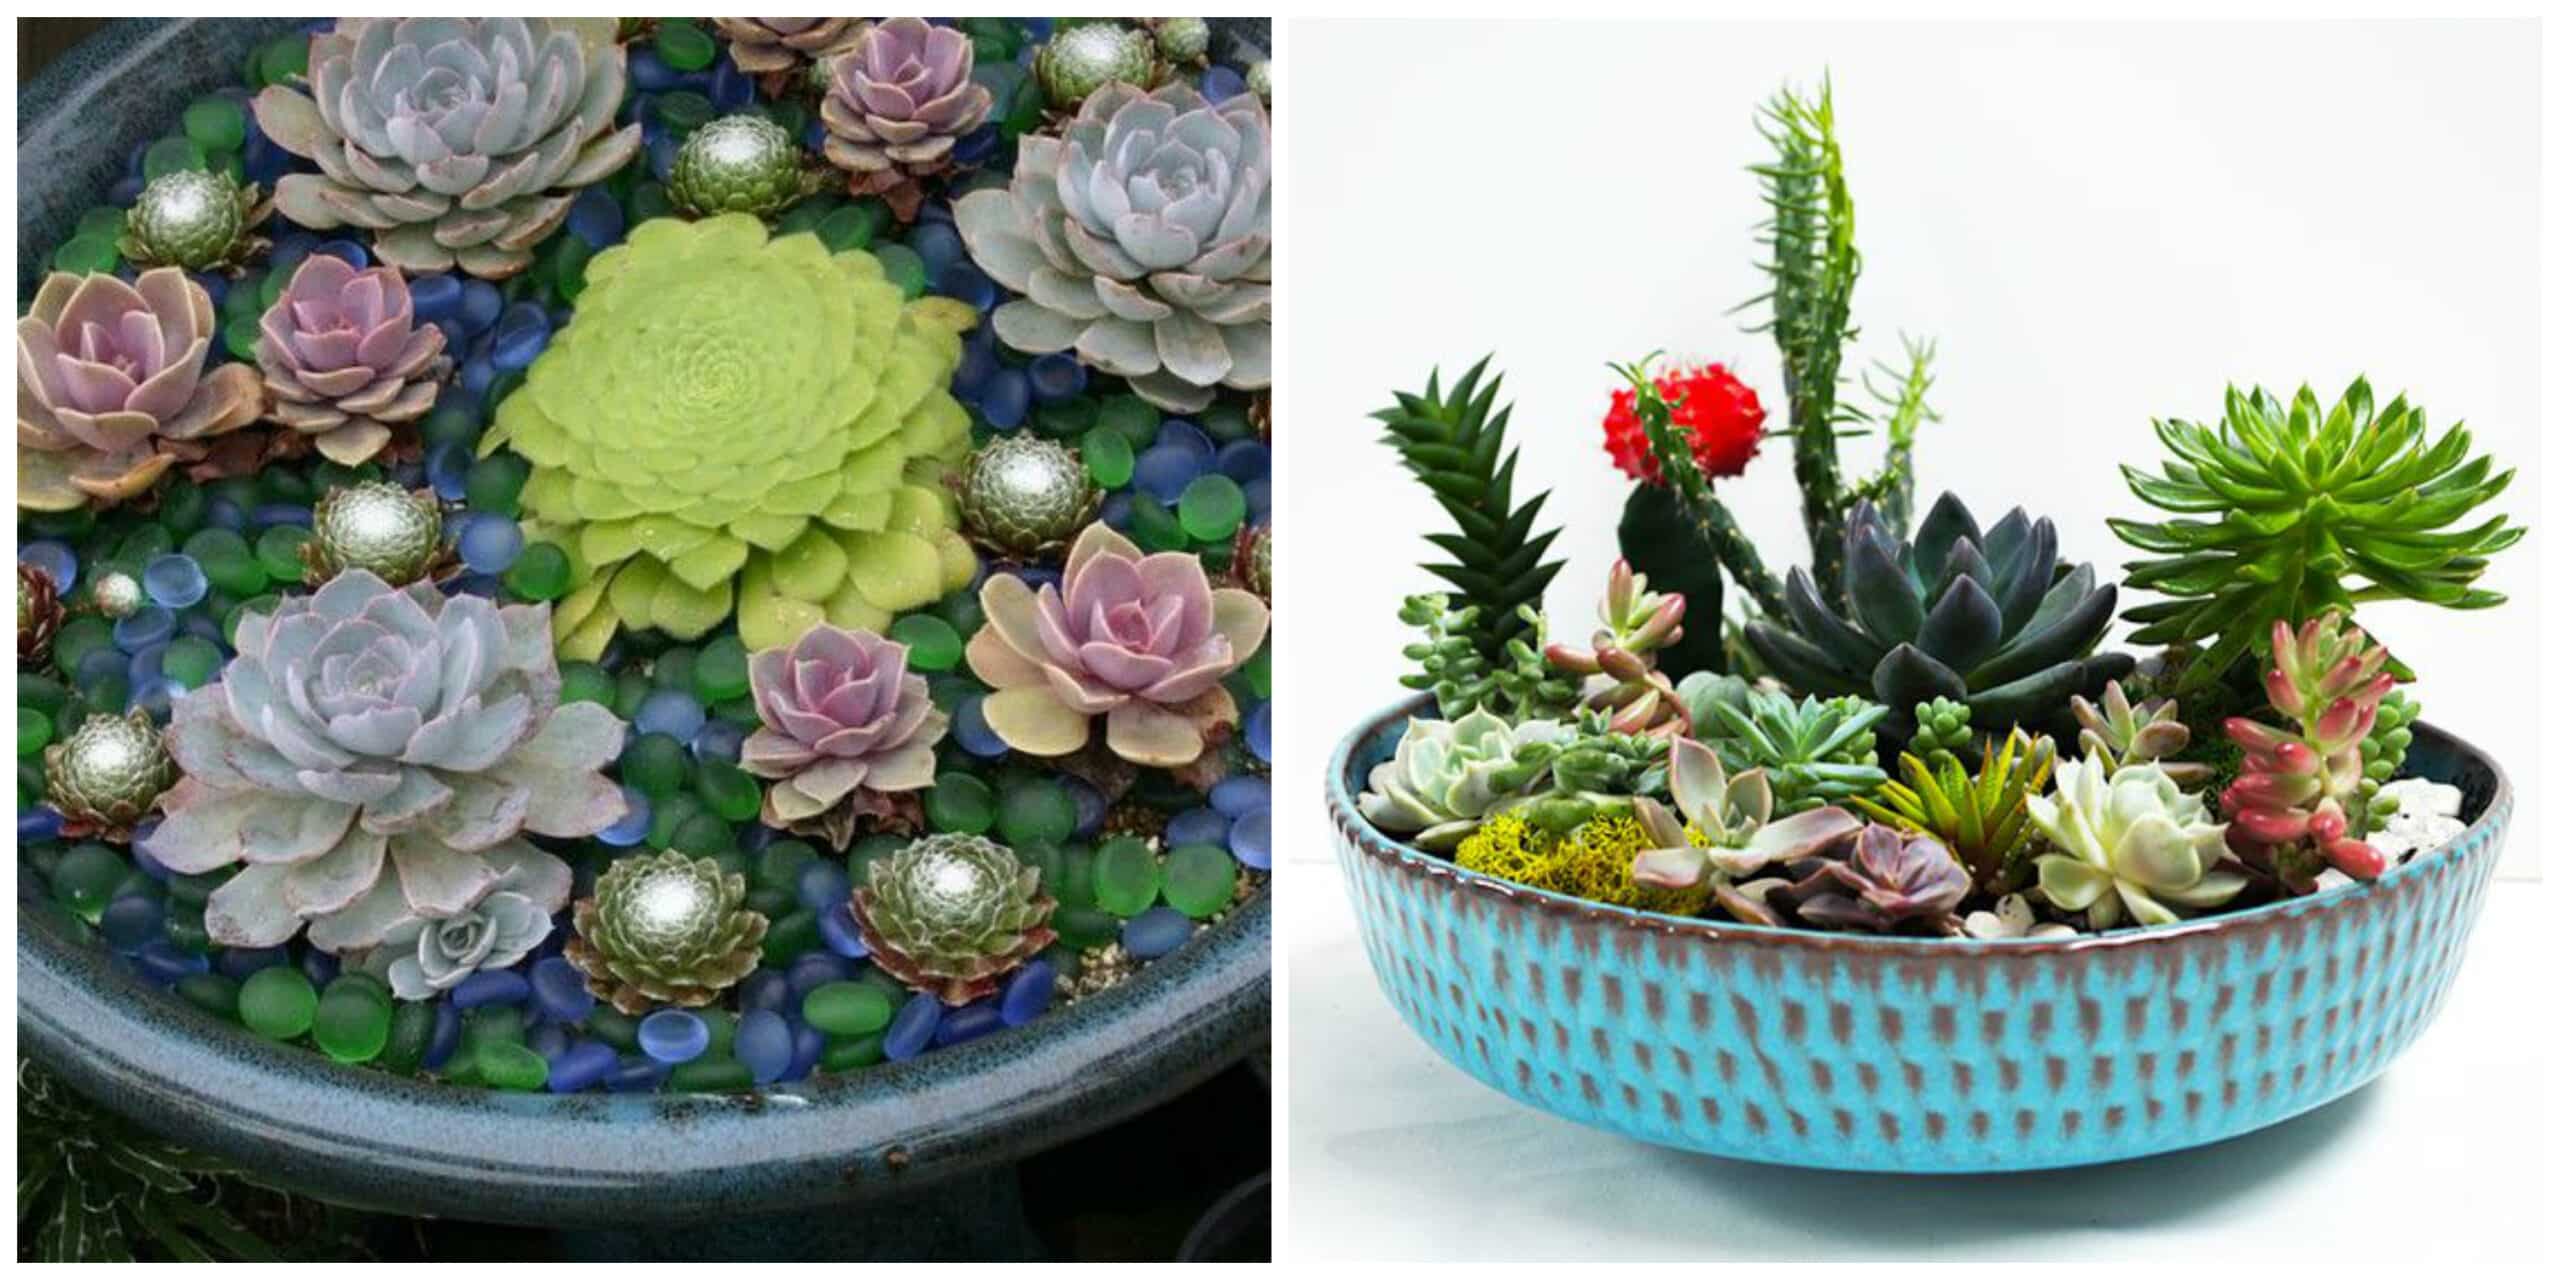 These 19 succulent displays are AMAZING! They are so creative and easy to do!